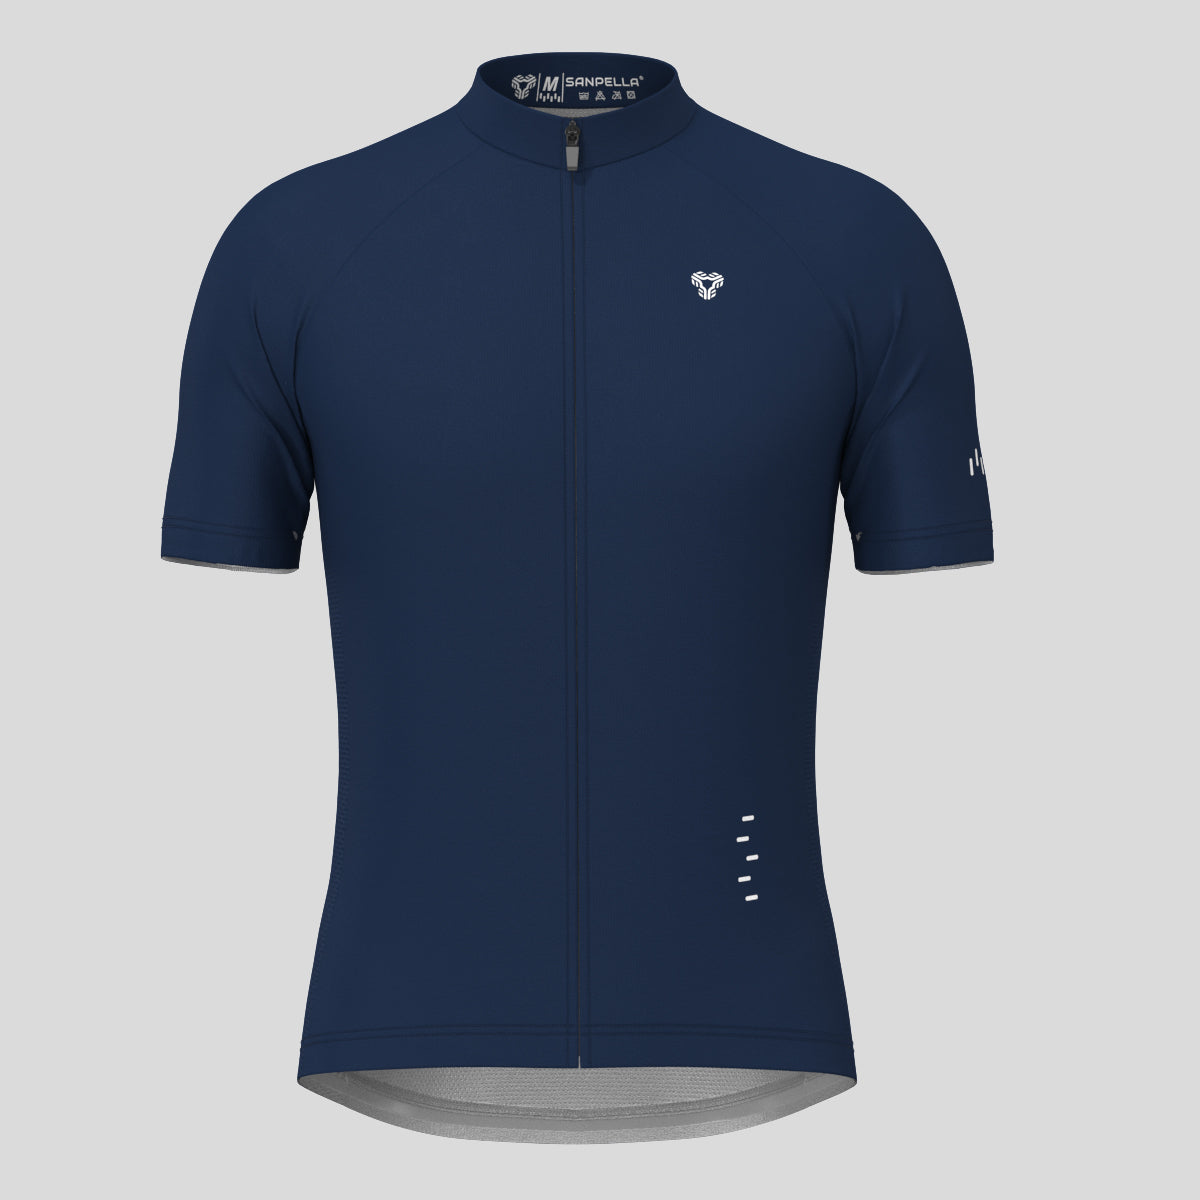 Men's Minimal Solid Cycling Jersey -Navy